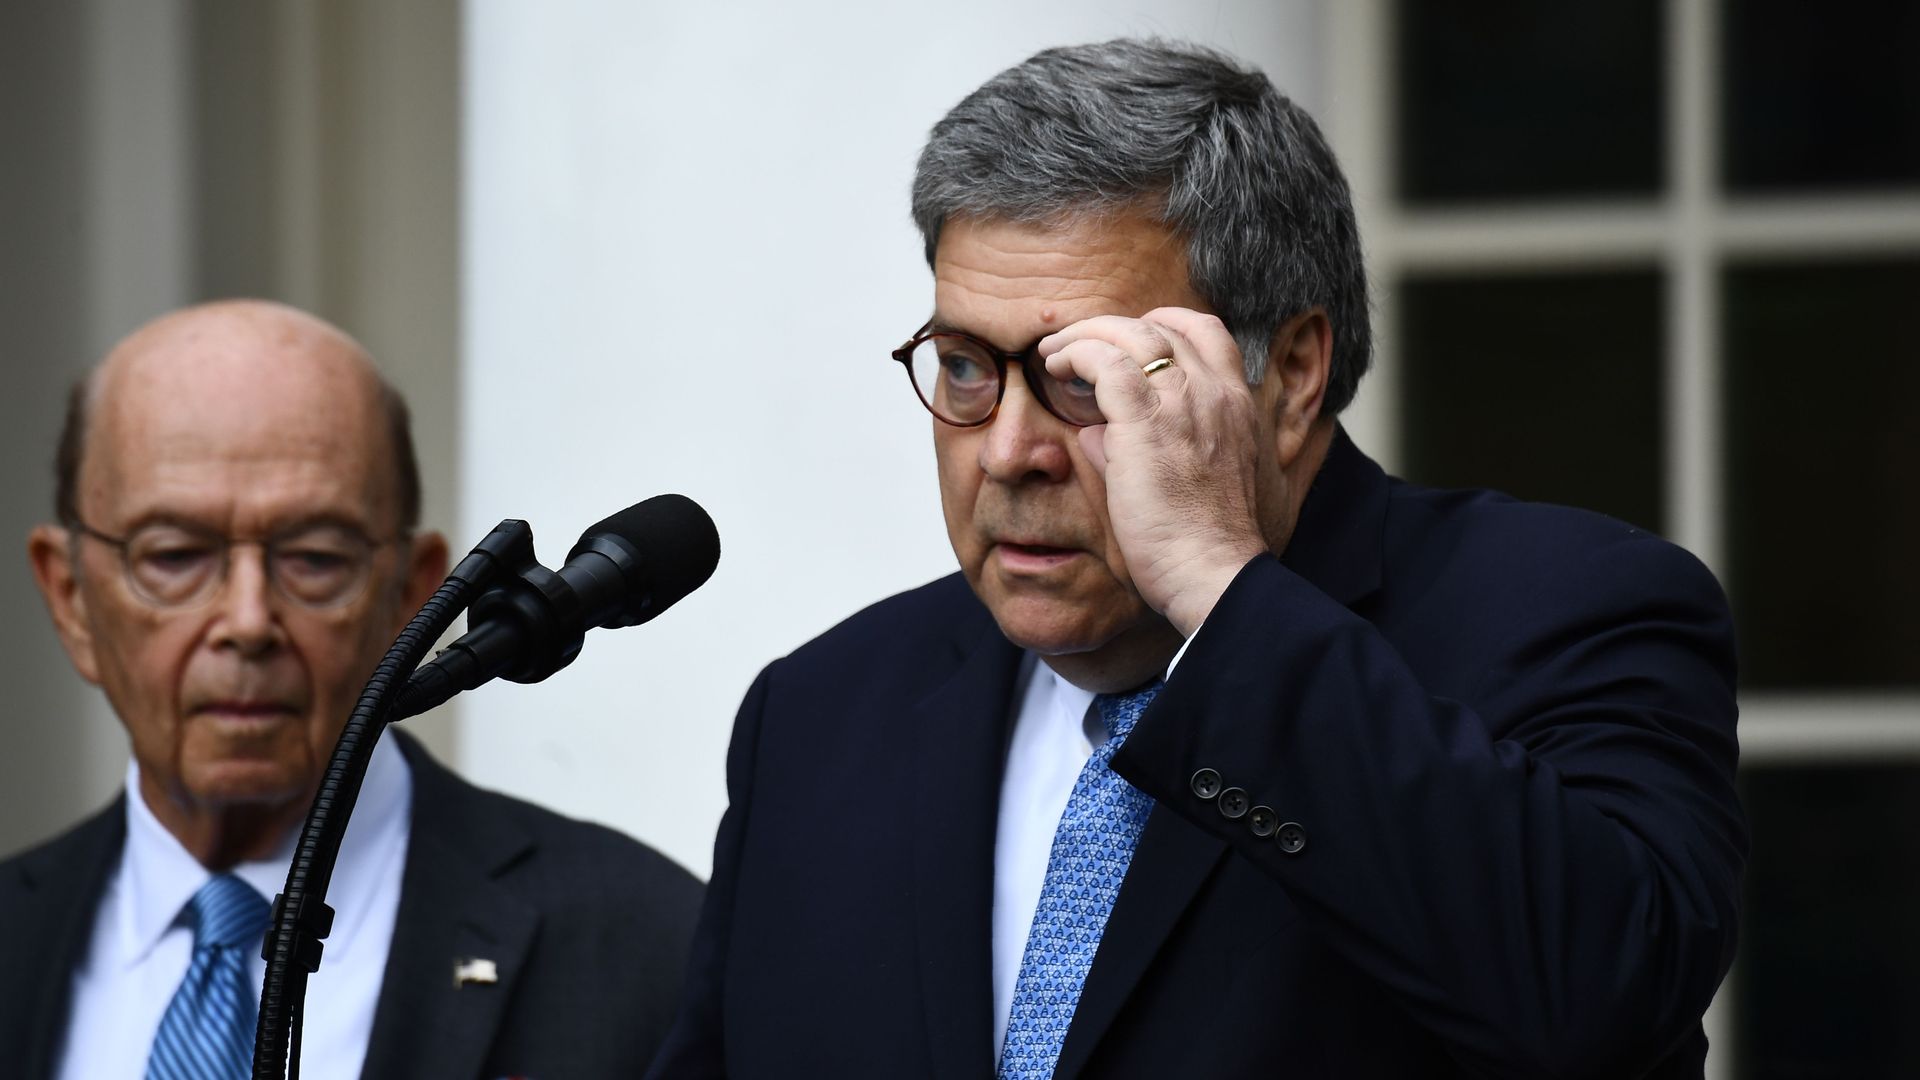 In this image, Barr and Ross stand outside in front of a microphone. Barr adjusts his glasses.